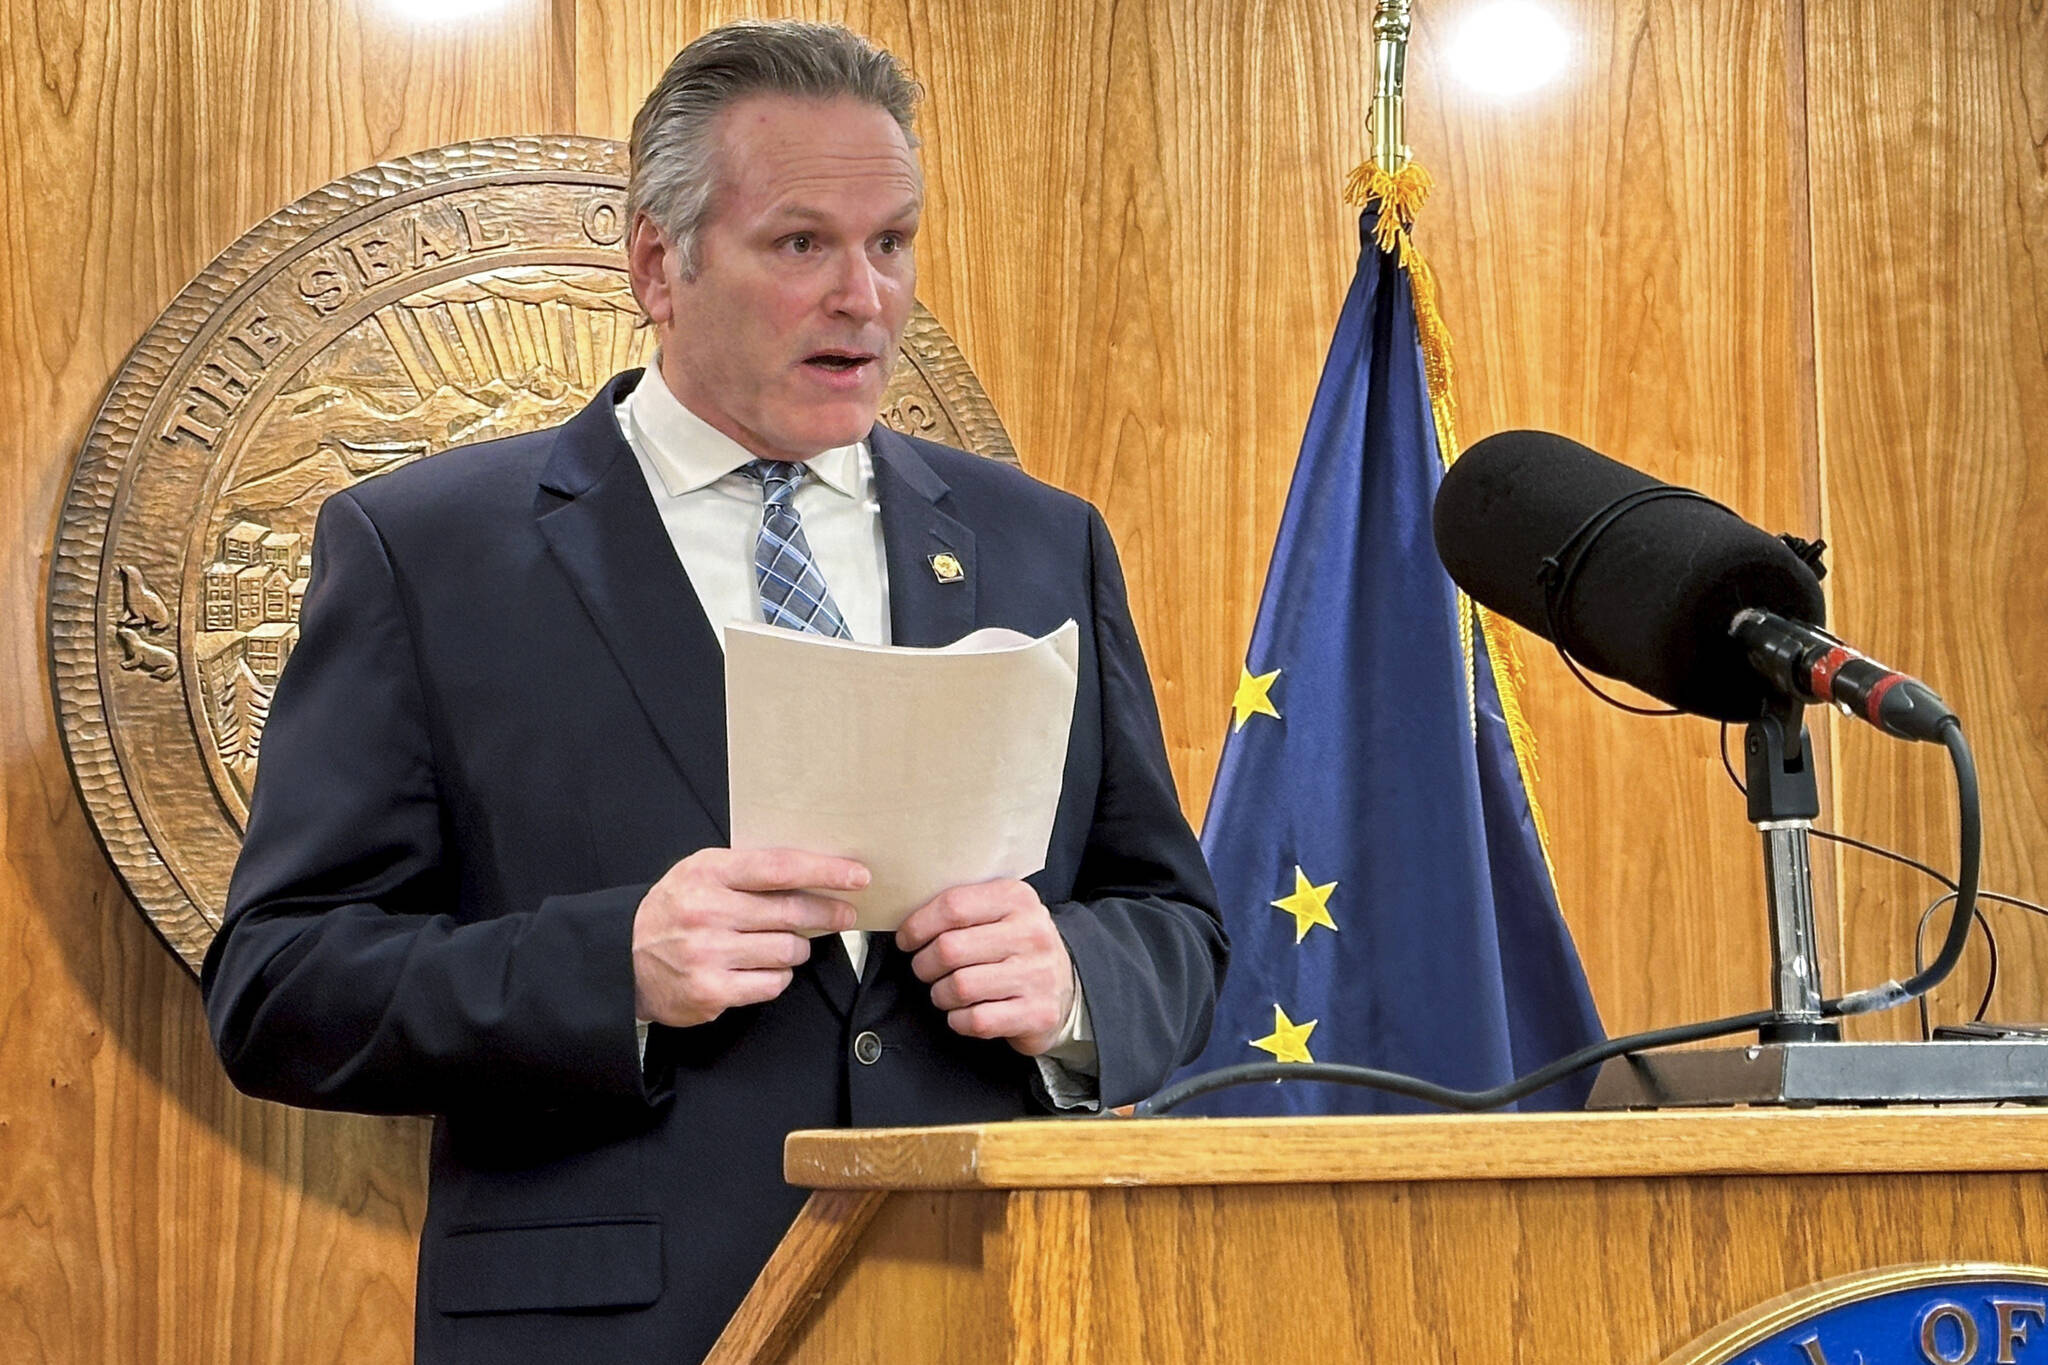 Gov. Mike Dunleavy speaks to reporters during a news conference on topics including education on Feb. 7 in Juneau. (Becky Bohrer/AP file photo)